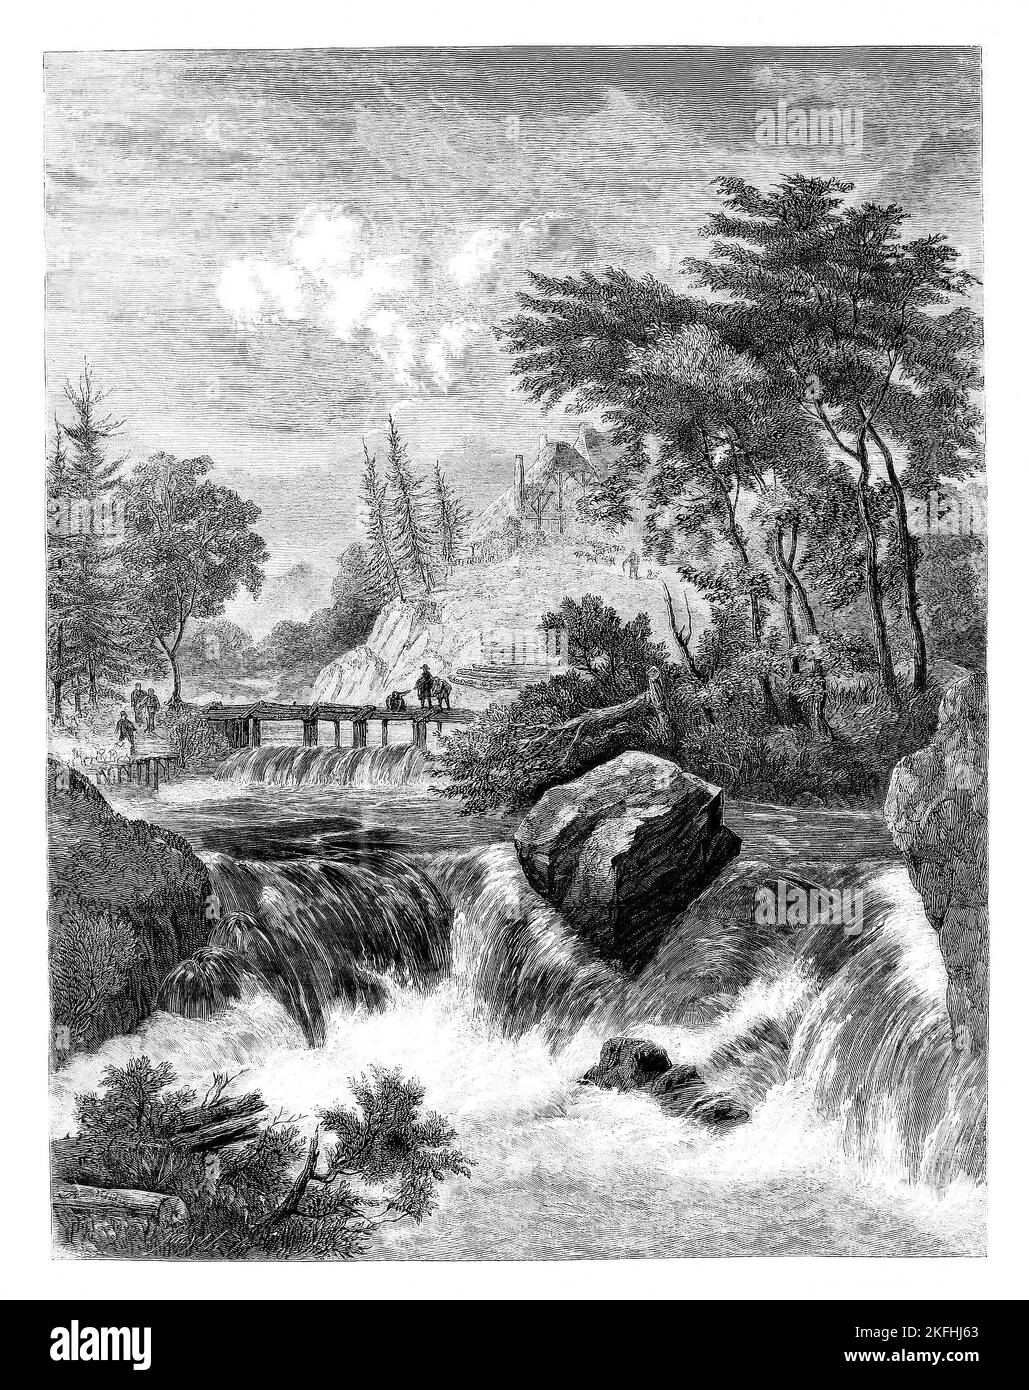 A sketch from a painting by Van Ruisdael (1629-1682) in the National Gallery. He painted many views of waterfalls probably inspired by his friend Allart van Everdingen who had been to Scandinavia and returned with drawings of the craggy mountains and waterfalls that became a source for van Ruisdael’s dramatic images. Stock Photo